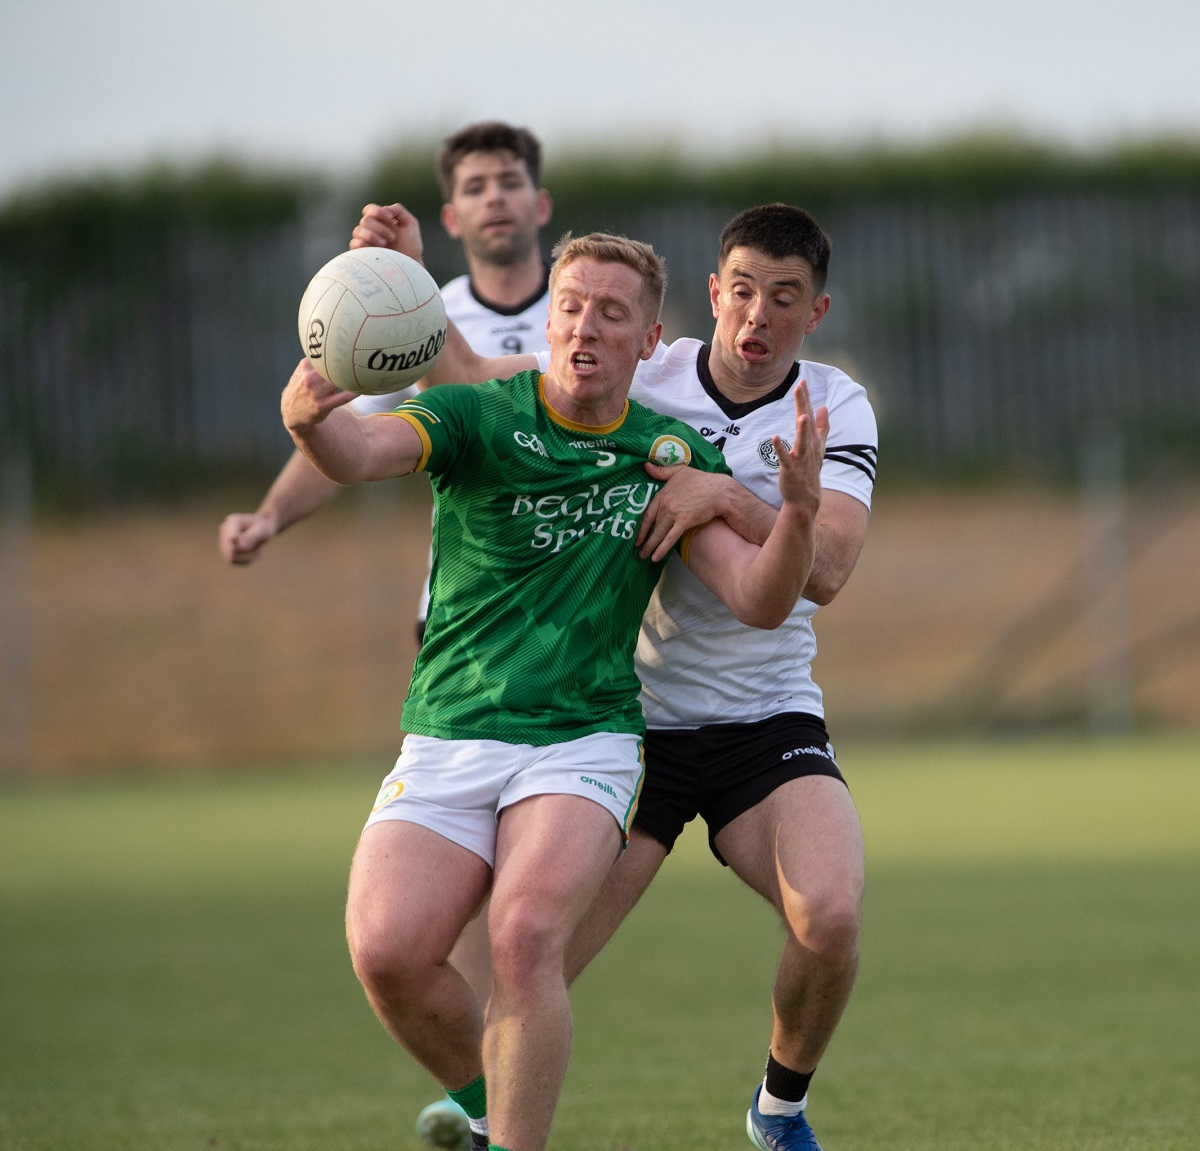 O’Neill rocket propels St Enda’s to victory